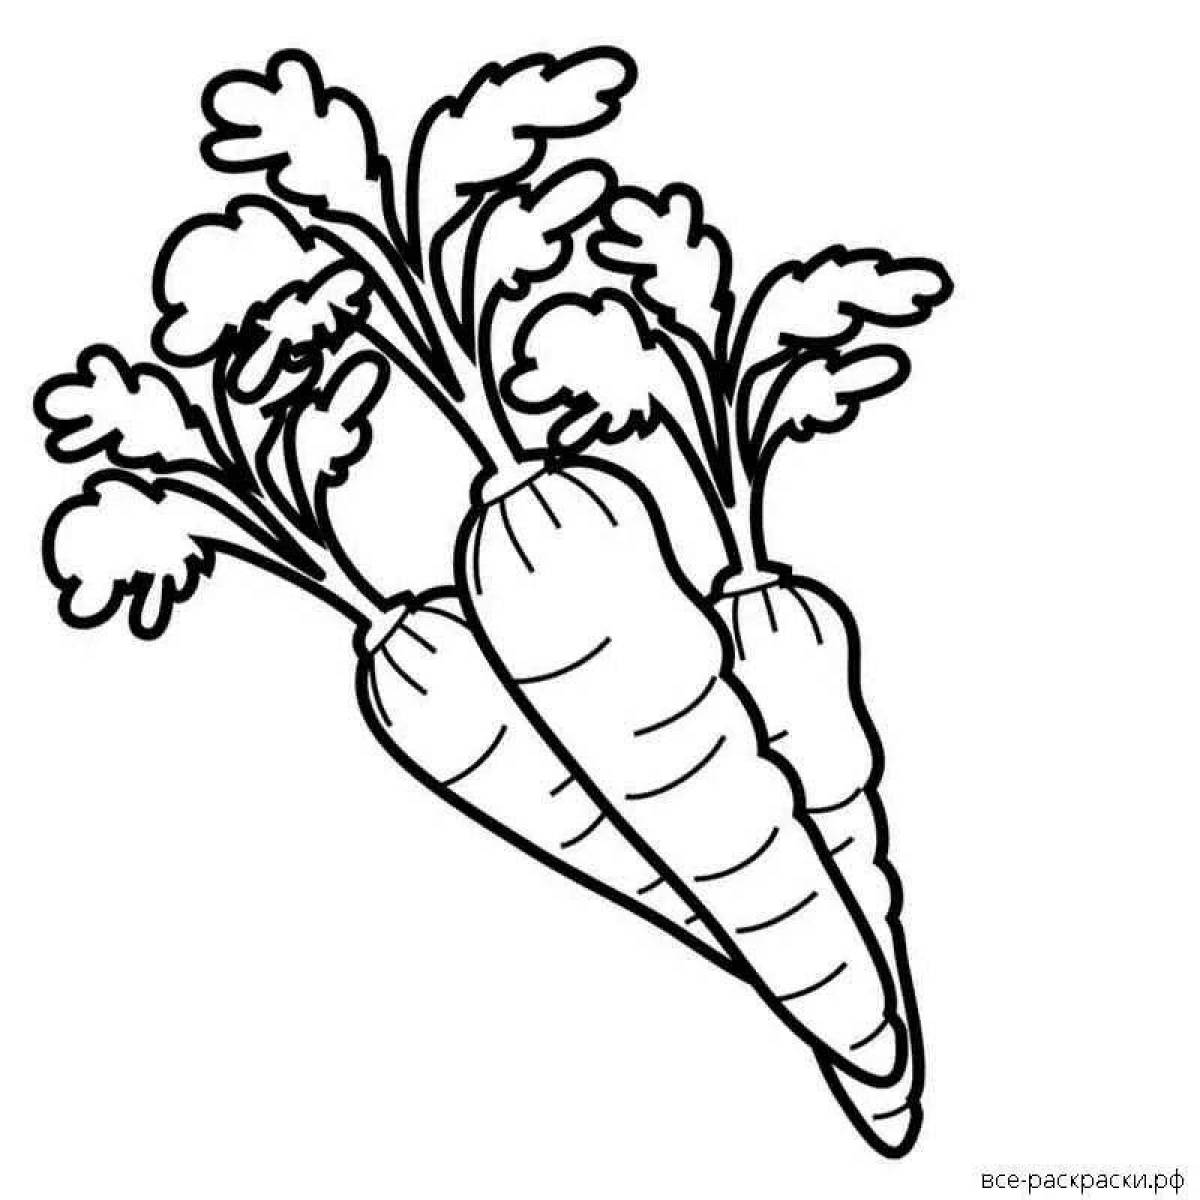 Fun Carrot Coloring Book for 3-4 year olds